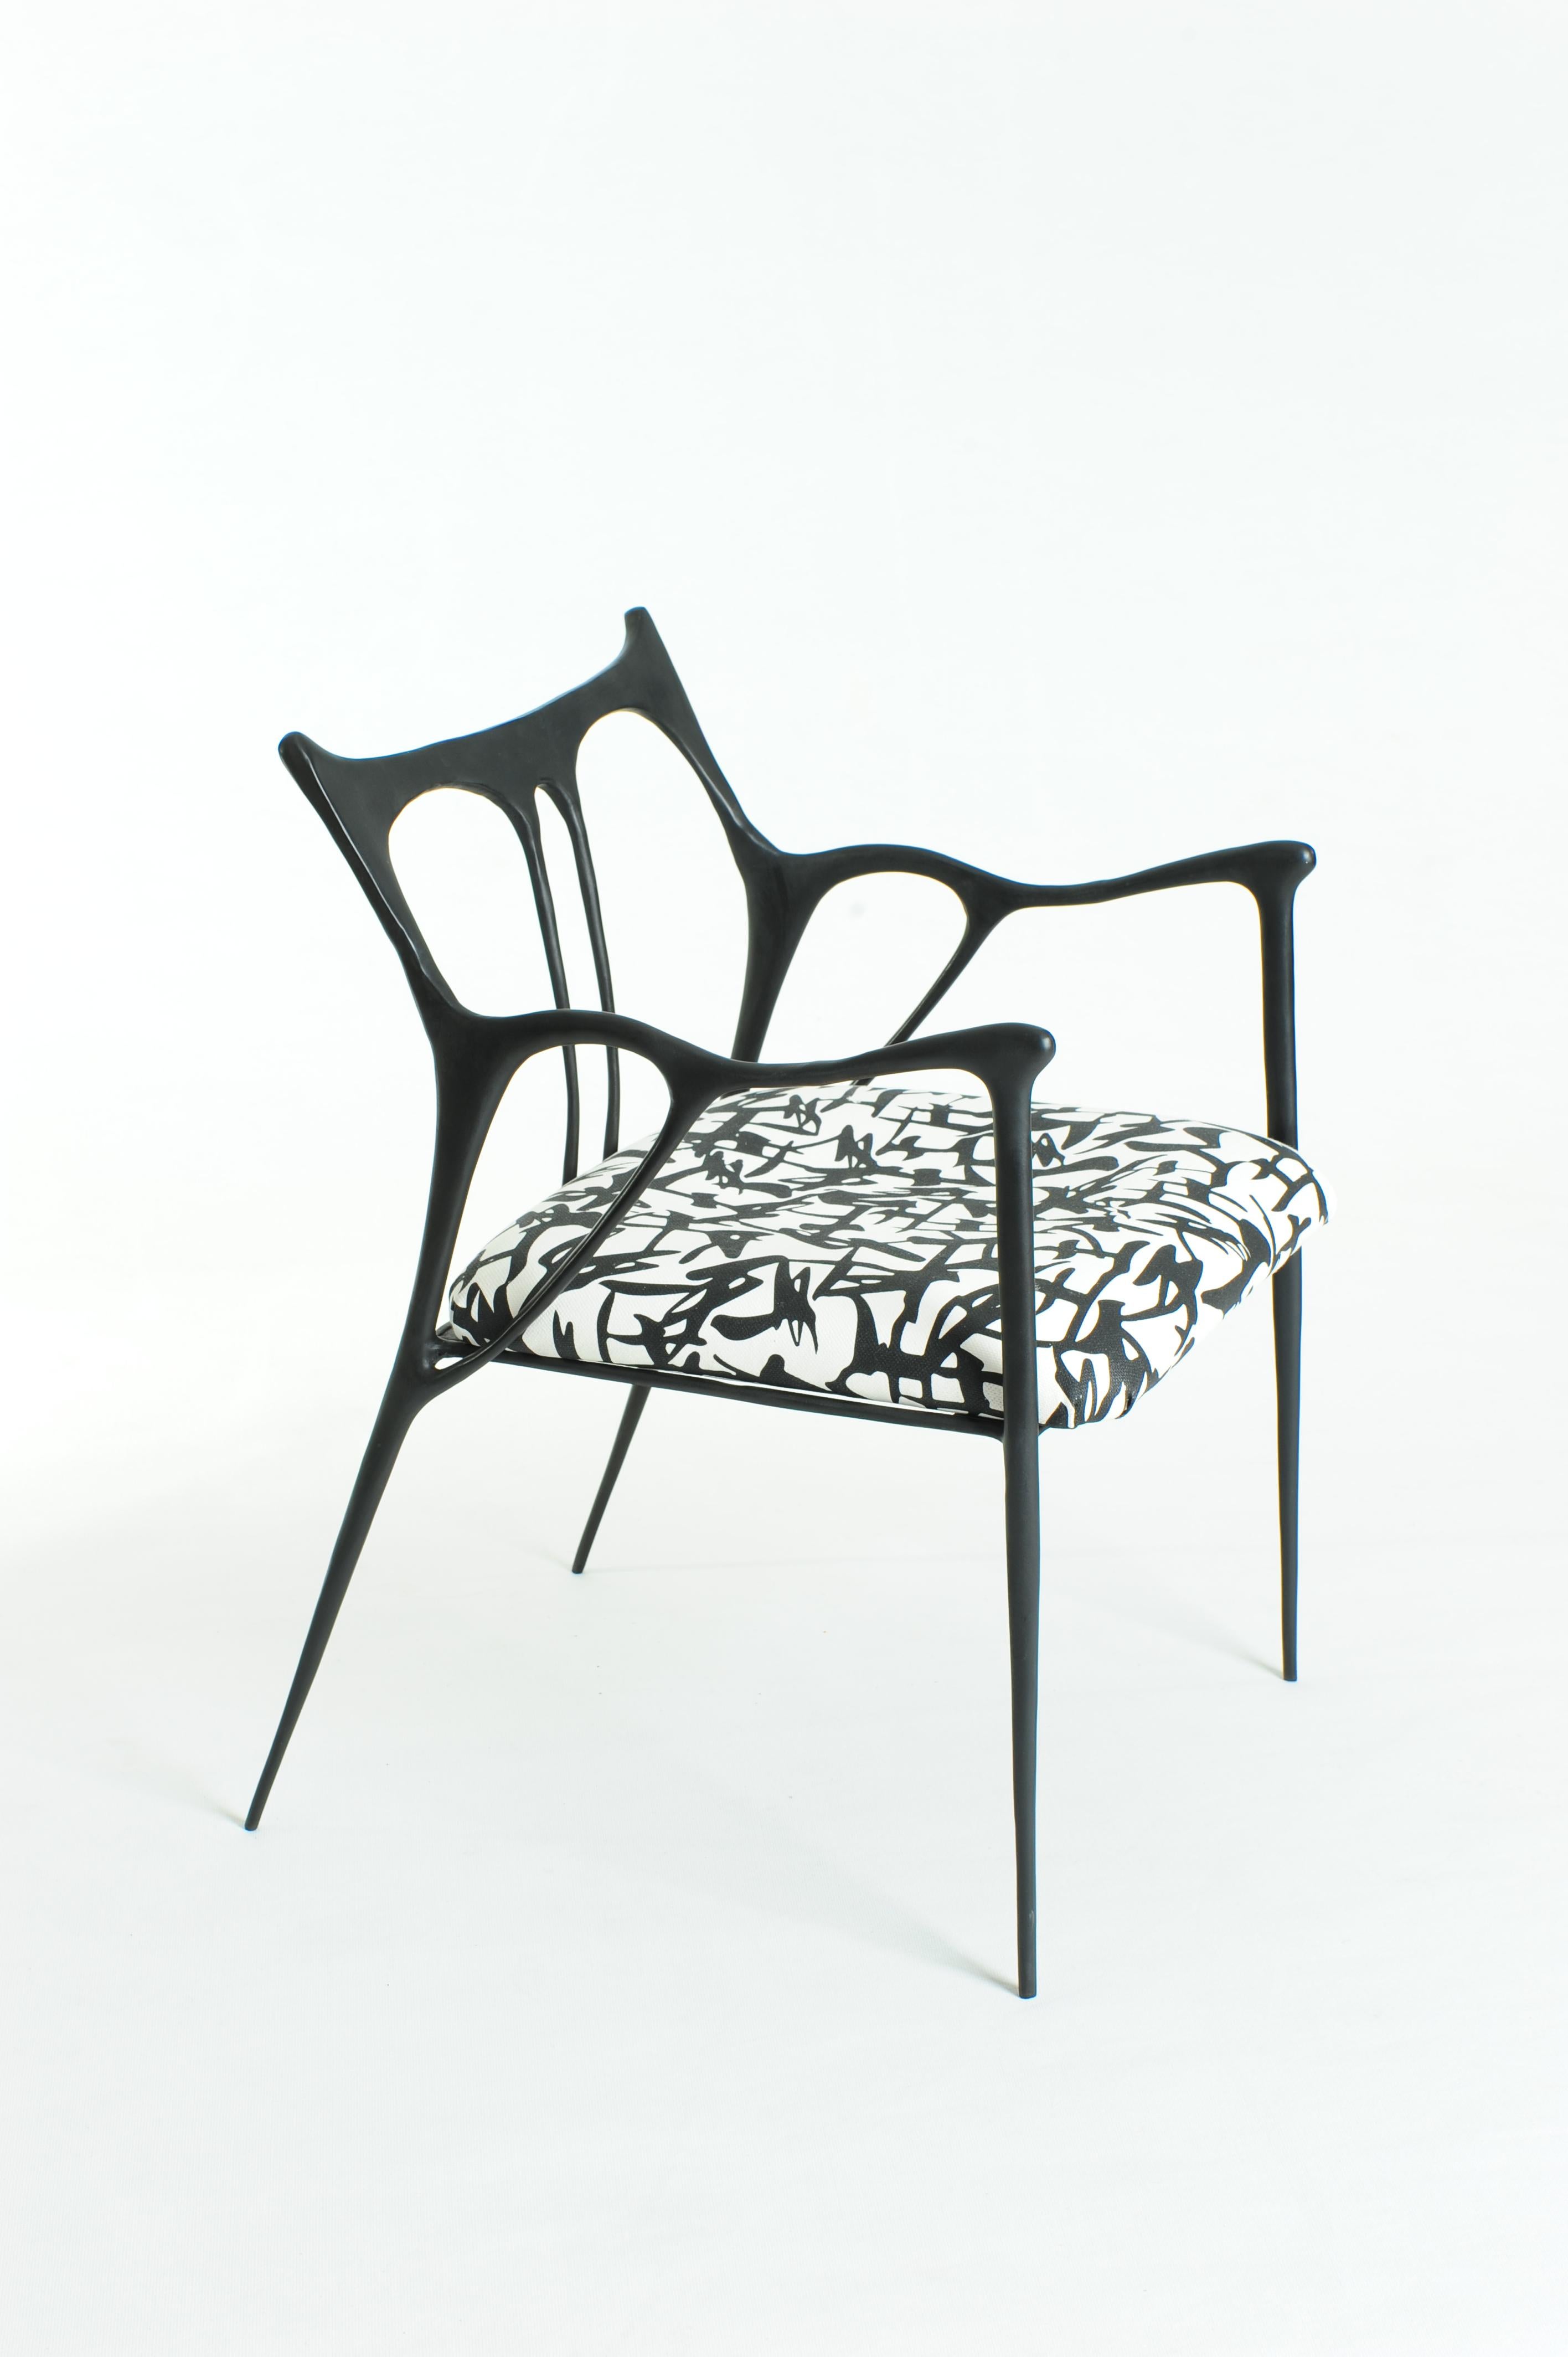 Black brass sculpted chair by Misaya
Dimensions: W 54 x L 58 x H 79 cm (seating: 63)
Hand-sculpted chair in brass.
 
Misaya emulates Chinese ink paintings through the process of lost-wax casting.

Each piece in the Ink collection – which consists of